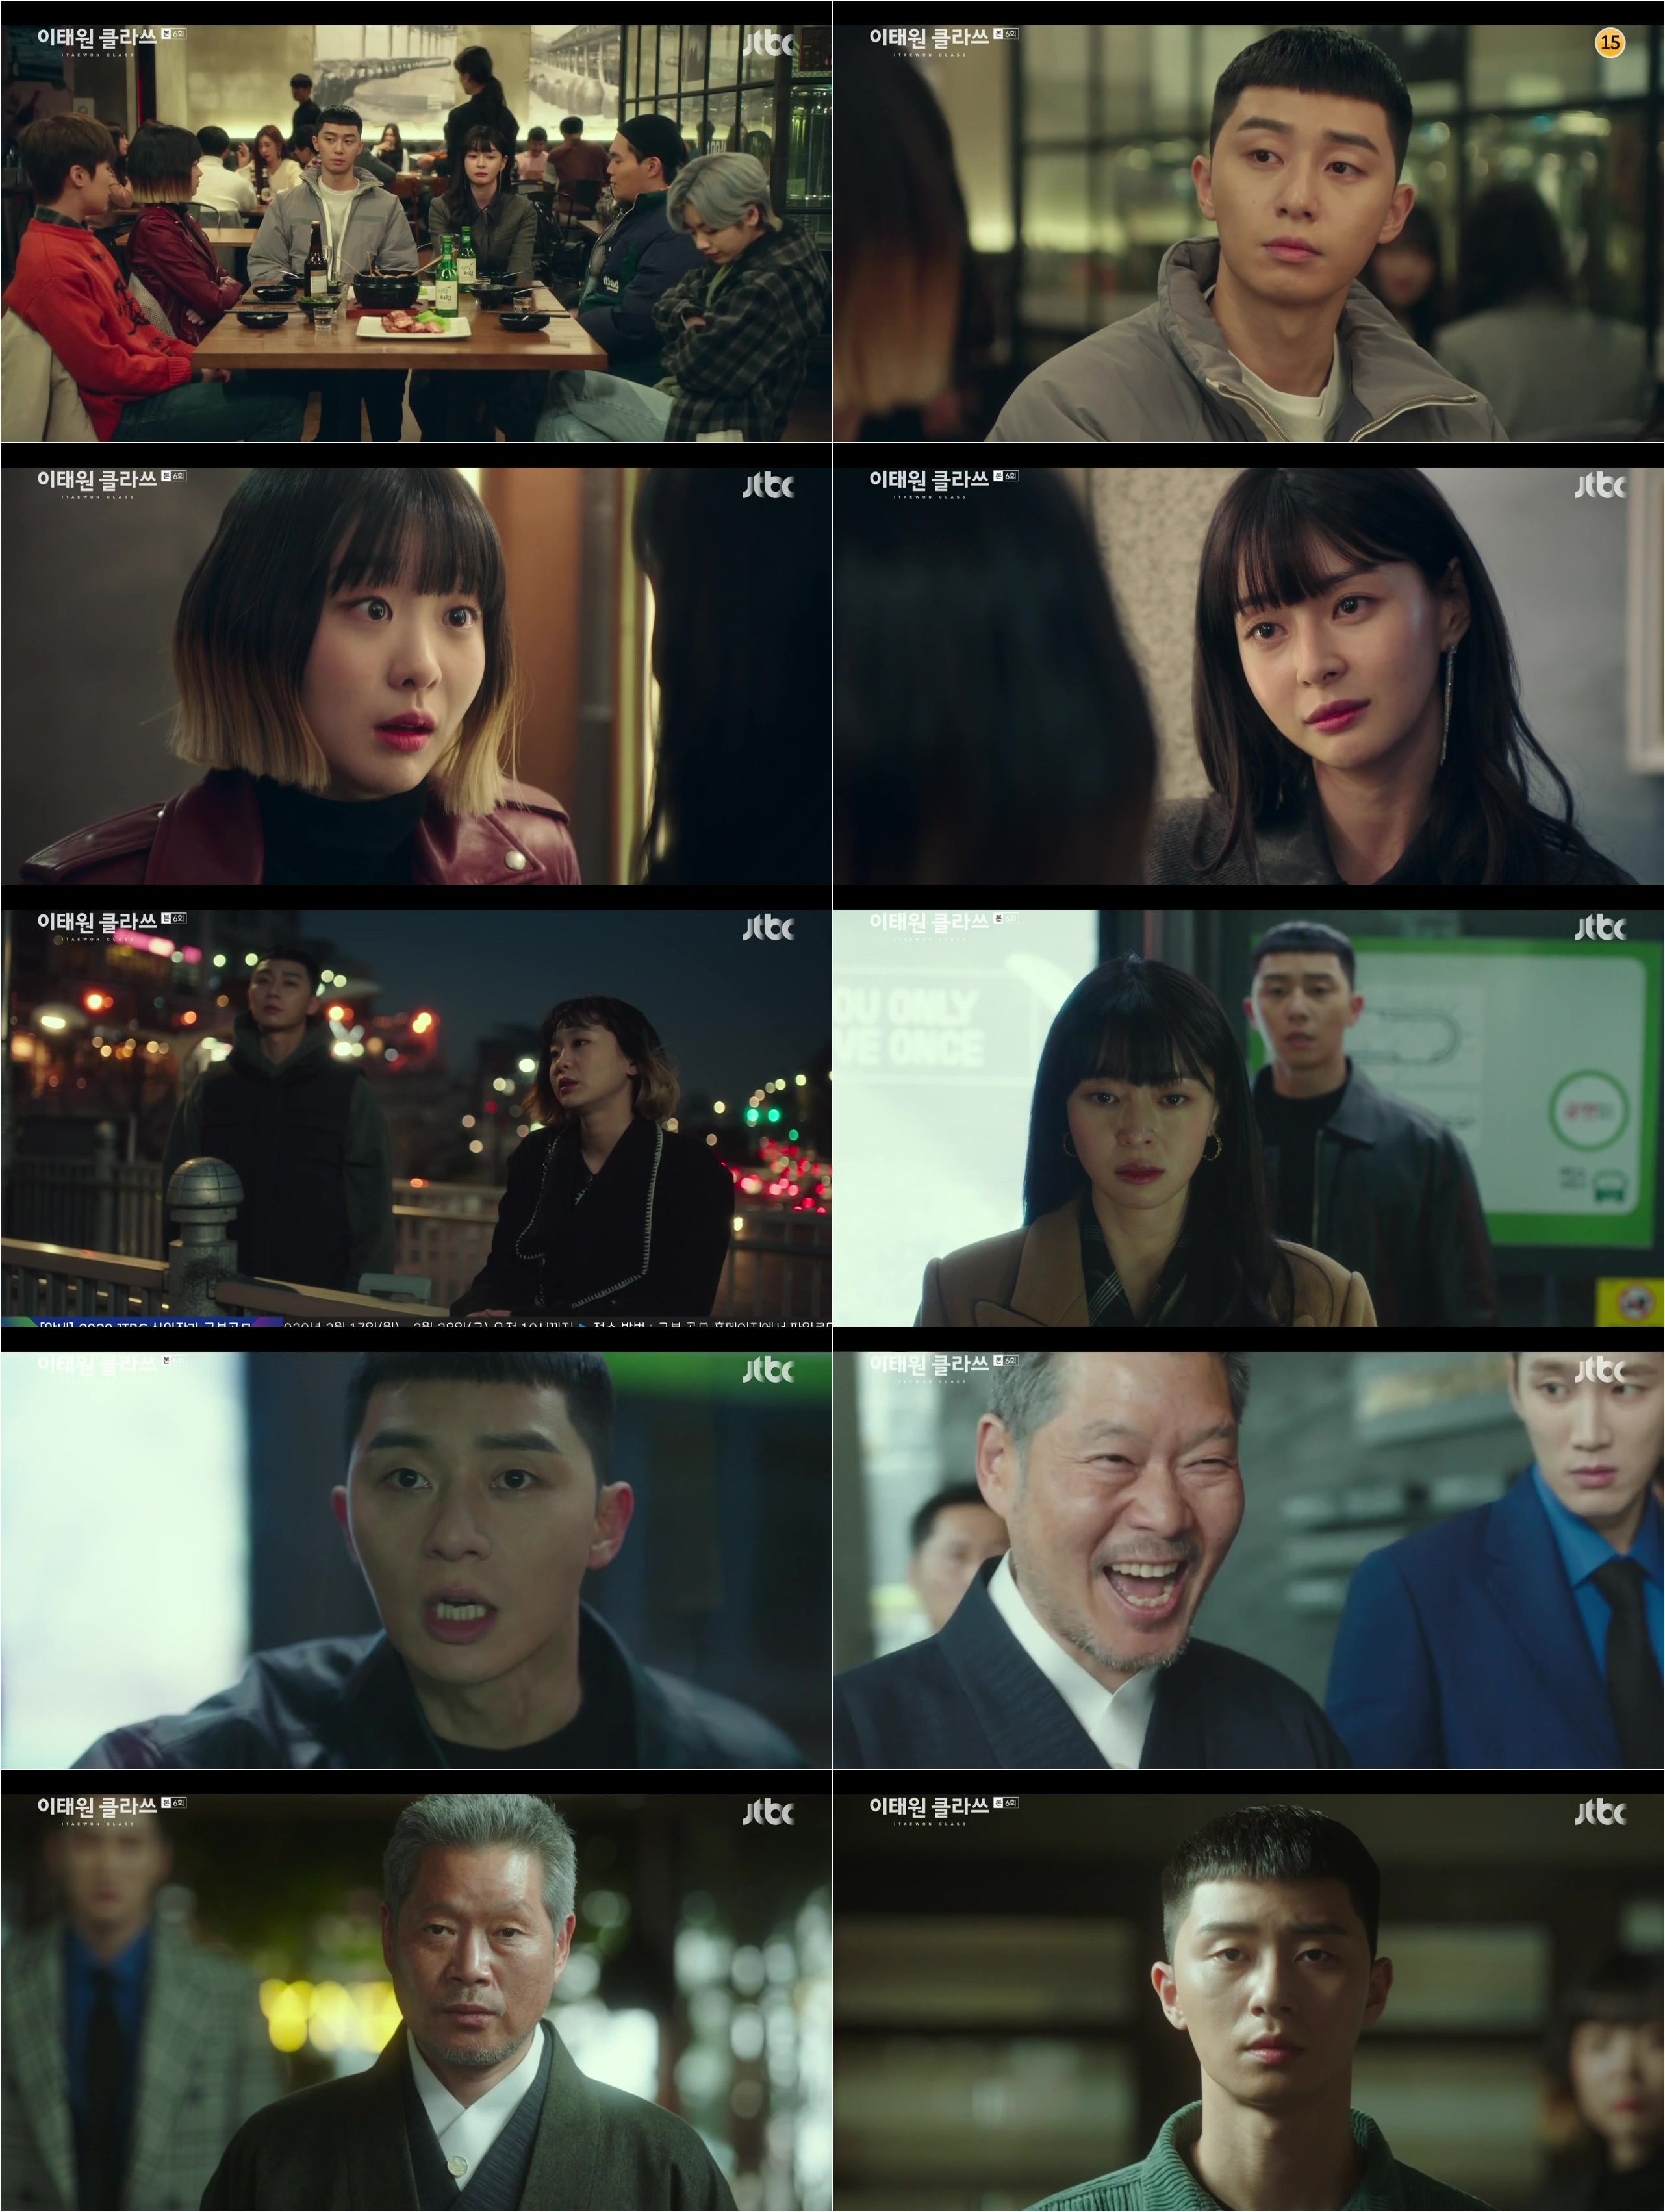 The Itaewon Klath is not sure that the uptrend will stop.JTBCs new gilt drama Itaewon Klath (directed by Kim Sung-yoon, playwright Cho Kwang-jin, production showbox and writing, original Web toon Itaewon Klath) broadcast on the 15th recorded 11.6% nationwide, 12.6% in the metropolitan area (based on Nielsen Korea and paid households), and it ranked first in the same time zone with explosive reaction, breaking its own highest audience rating every day ...Park Seo-joons beautiful cider rebellion, which chewed on the room, is heating up viewers.Park Seo-joon (Park Seo-joon) launched a counterattack against Jangga Group and Jang Dae-hee (Yoo Jae-myung).After sensing his extraordinary movement, Chang found Foa directly at night, and the two reunions that he faced again in more than a decade raised the tension with a hot clash.Park confided in her dream before the members of the Danbam and Oh Soo-ah (Kwon Na-ra), which is to create the franchise of the Danbam Foa.It seems reckless and impossible, but the staff added strength to the dream with deep faith, and Oh Soo-ah, who watched it, was deeply troubled by the re-emergence of Changs demands.Meanwhile, Joe-yol Lee, who had been interrupted by Roy and Oh Soo-ah with a daring defence, had become more tense.Oh Soo-ah smiled at the confession that he liked Roy, saying, The new Roy likes me.Im going to break up, sister, Joe-yool Lees cold warning prompted curiosity about their relationship changes.Chang, who found out that his second son, Jang Geun-soo (Kim Dong-hee), was in Foa at night, was more troubled by the presence of Park.Its reckless and stupid, its soft and hard, and if you set your goal, its going to be slow, but its definitely going, Oh Soo-ah told Chang when asked about the Roy.Unlike the snorting chapter, The Changga was a small Foa at first.The growth of a person with a firm goal is a scary law. Oh Soo-ah finally decided to follow the chairman of the house with his back to the house.Ive been living in my life, he said, and Ive been living in a long-term family, and Ill be doing it in the future.After witnessing the two friendly people, The Fountainhead asked his father about his plans for Roy.But unlike the way he looked at it, he ignored Roy, saying, It was only a store that I did for 10 years with a solid goal. He ignored the fact that he was a gauge to see if he was my person.At that, the Fountainhead was in high spirits, and when he met Roy at a broadcast-related meeting, he shook him with the disregard and mockery of Chang.Eventually, the Fountainhead also destroyed the chance to appear on the air at night.The inevitable rivalry with the Janga group, which started with the past bad news, was also heartbreaking for Oh Soo-ahs meeting.Joe-yol Lee, who has watched his consistent mind, revealed the real identity of the Foa reporter at night.Roy, who found out that Oh Soo-ah was not doing it, took her hand with apologies at the time when she would have been alone.The heart rate was raised by the declaration of the war of the bark, who shouted to Oh Soo-ah, I do not want to do anything, and you do not have to be hard anymore, I will finish it!Roy had been preparing for a counterattack for a long time.At the end of the broadcast, Lee Ho-jin (Lee Idawit), who became a fund manager, added to his curiosity as it was revealed that he invested his fathers death insurance money in a Jangga group that was collapsing eight years ago.In addition, the reversal of the sudden rise of shareholders with a total of 1.9 billion won in stocks, including all of their funds in the group, was catharsis.After a mad smile in a room in Roy, Jang Dae-hee found Foa at night. The two mens close reunions brought tension to a full level.It is already exciting to see what kind of counterattack the opponent, Jang Dae-hee, will be fighting against, with the revenge of Roy, who threatens the industrys No. 1 Jangga Group following the receipt of Itaewon.Meanwhile, the appearance of a new part-time student, Kim Tony (Chris Ryan), also drew attention, which makes us expect stories that will become more colorful in the original characters appearance that was not in the original.The hot response of viewers continues to be followed by the hot rebellion that the Danbamjas and the Parksae will unfold with the joining of Kim Tony.Viewers who watched the broadcast are responding such as Do you have revenge from next week?, I am crazy about gold and earth for a long time and I am excited with the last room!On the other hand, Itaewon Clath is broadcast every Friday and Saturday at 10:50 JTBC.iMBC  Screen Capture JTBC